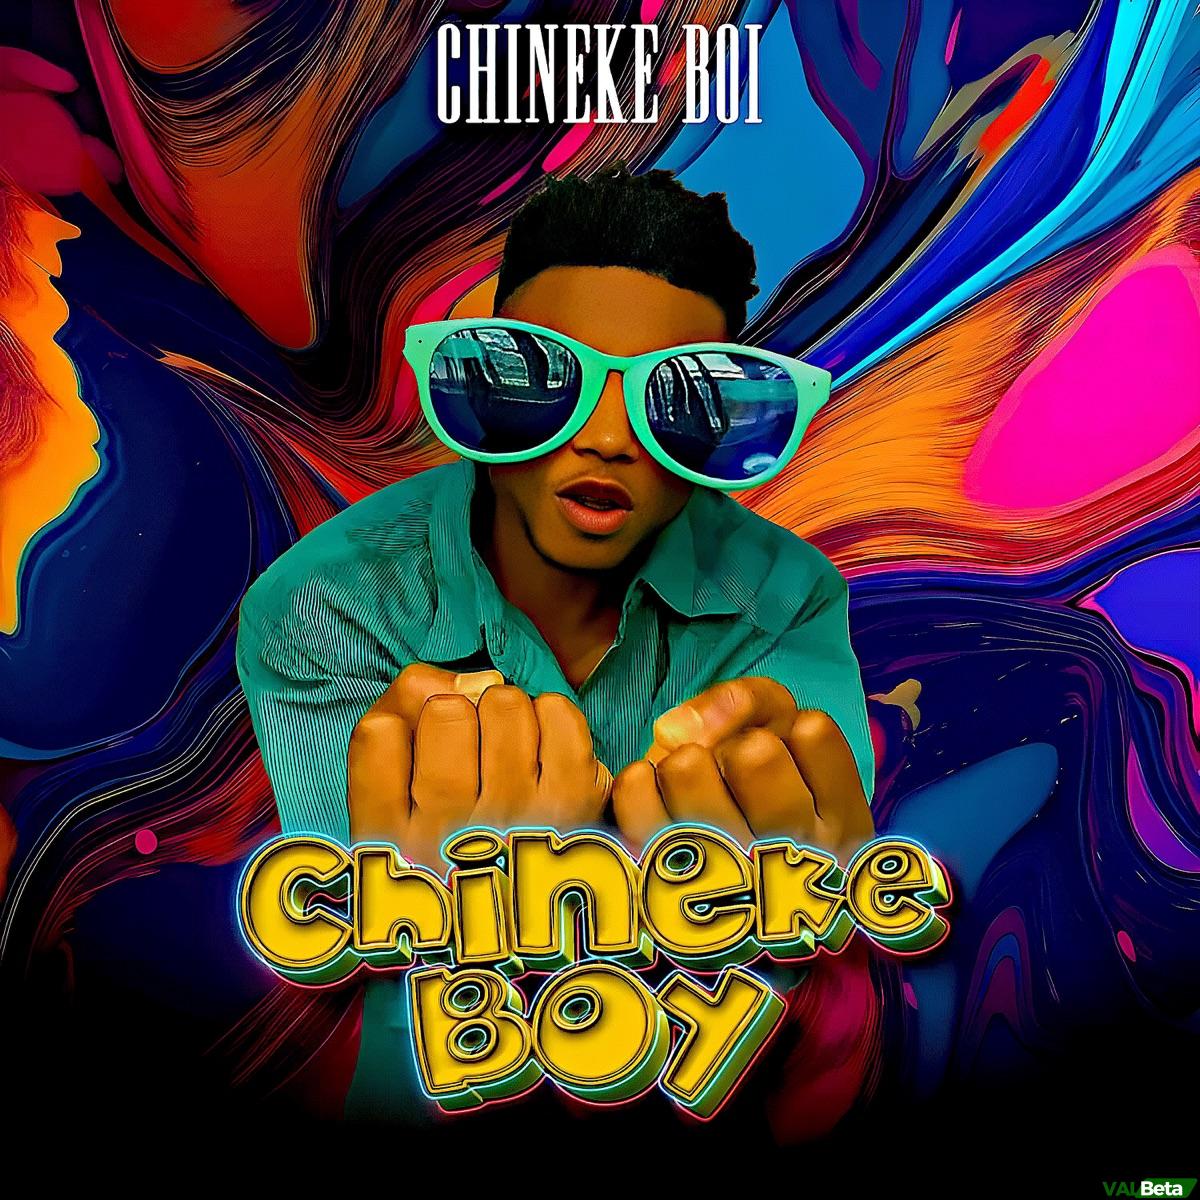 Fine Person – Song by ChinekeBoi